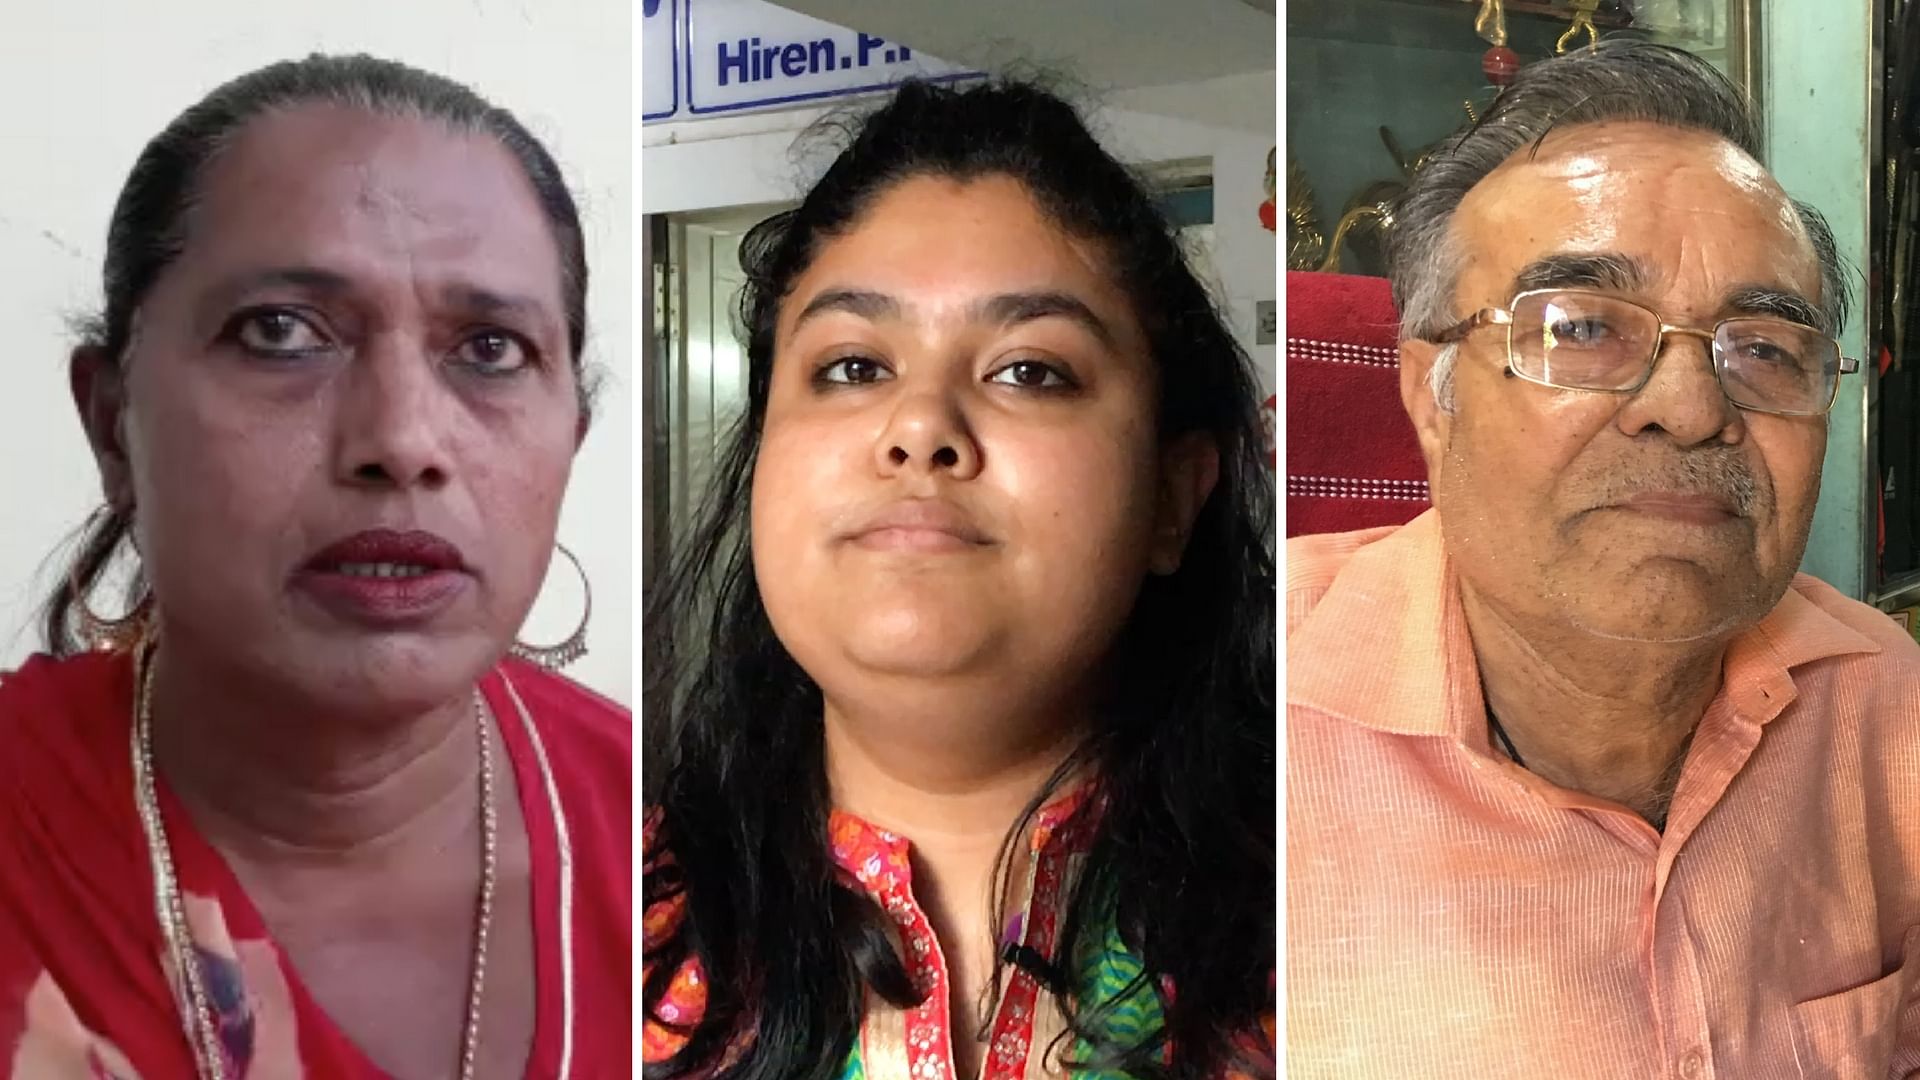 From GST to the health sector, these 5 voters talk about what will define their vote in Gujarat elections.